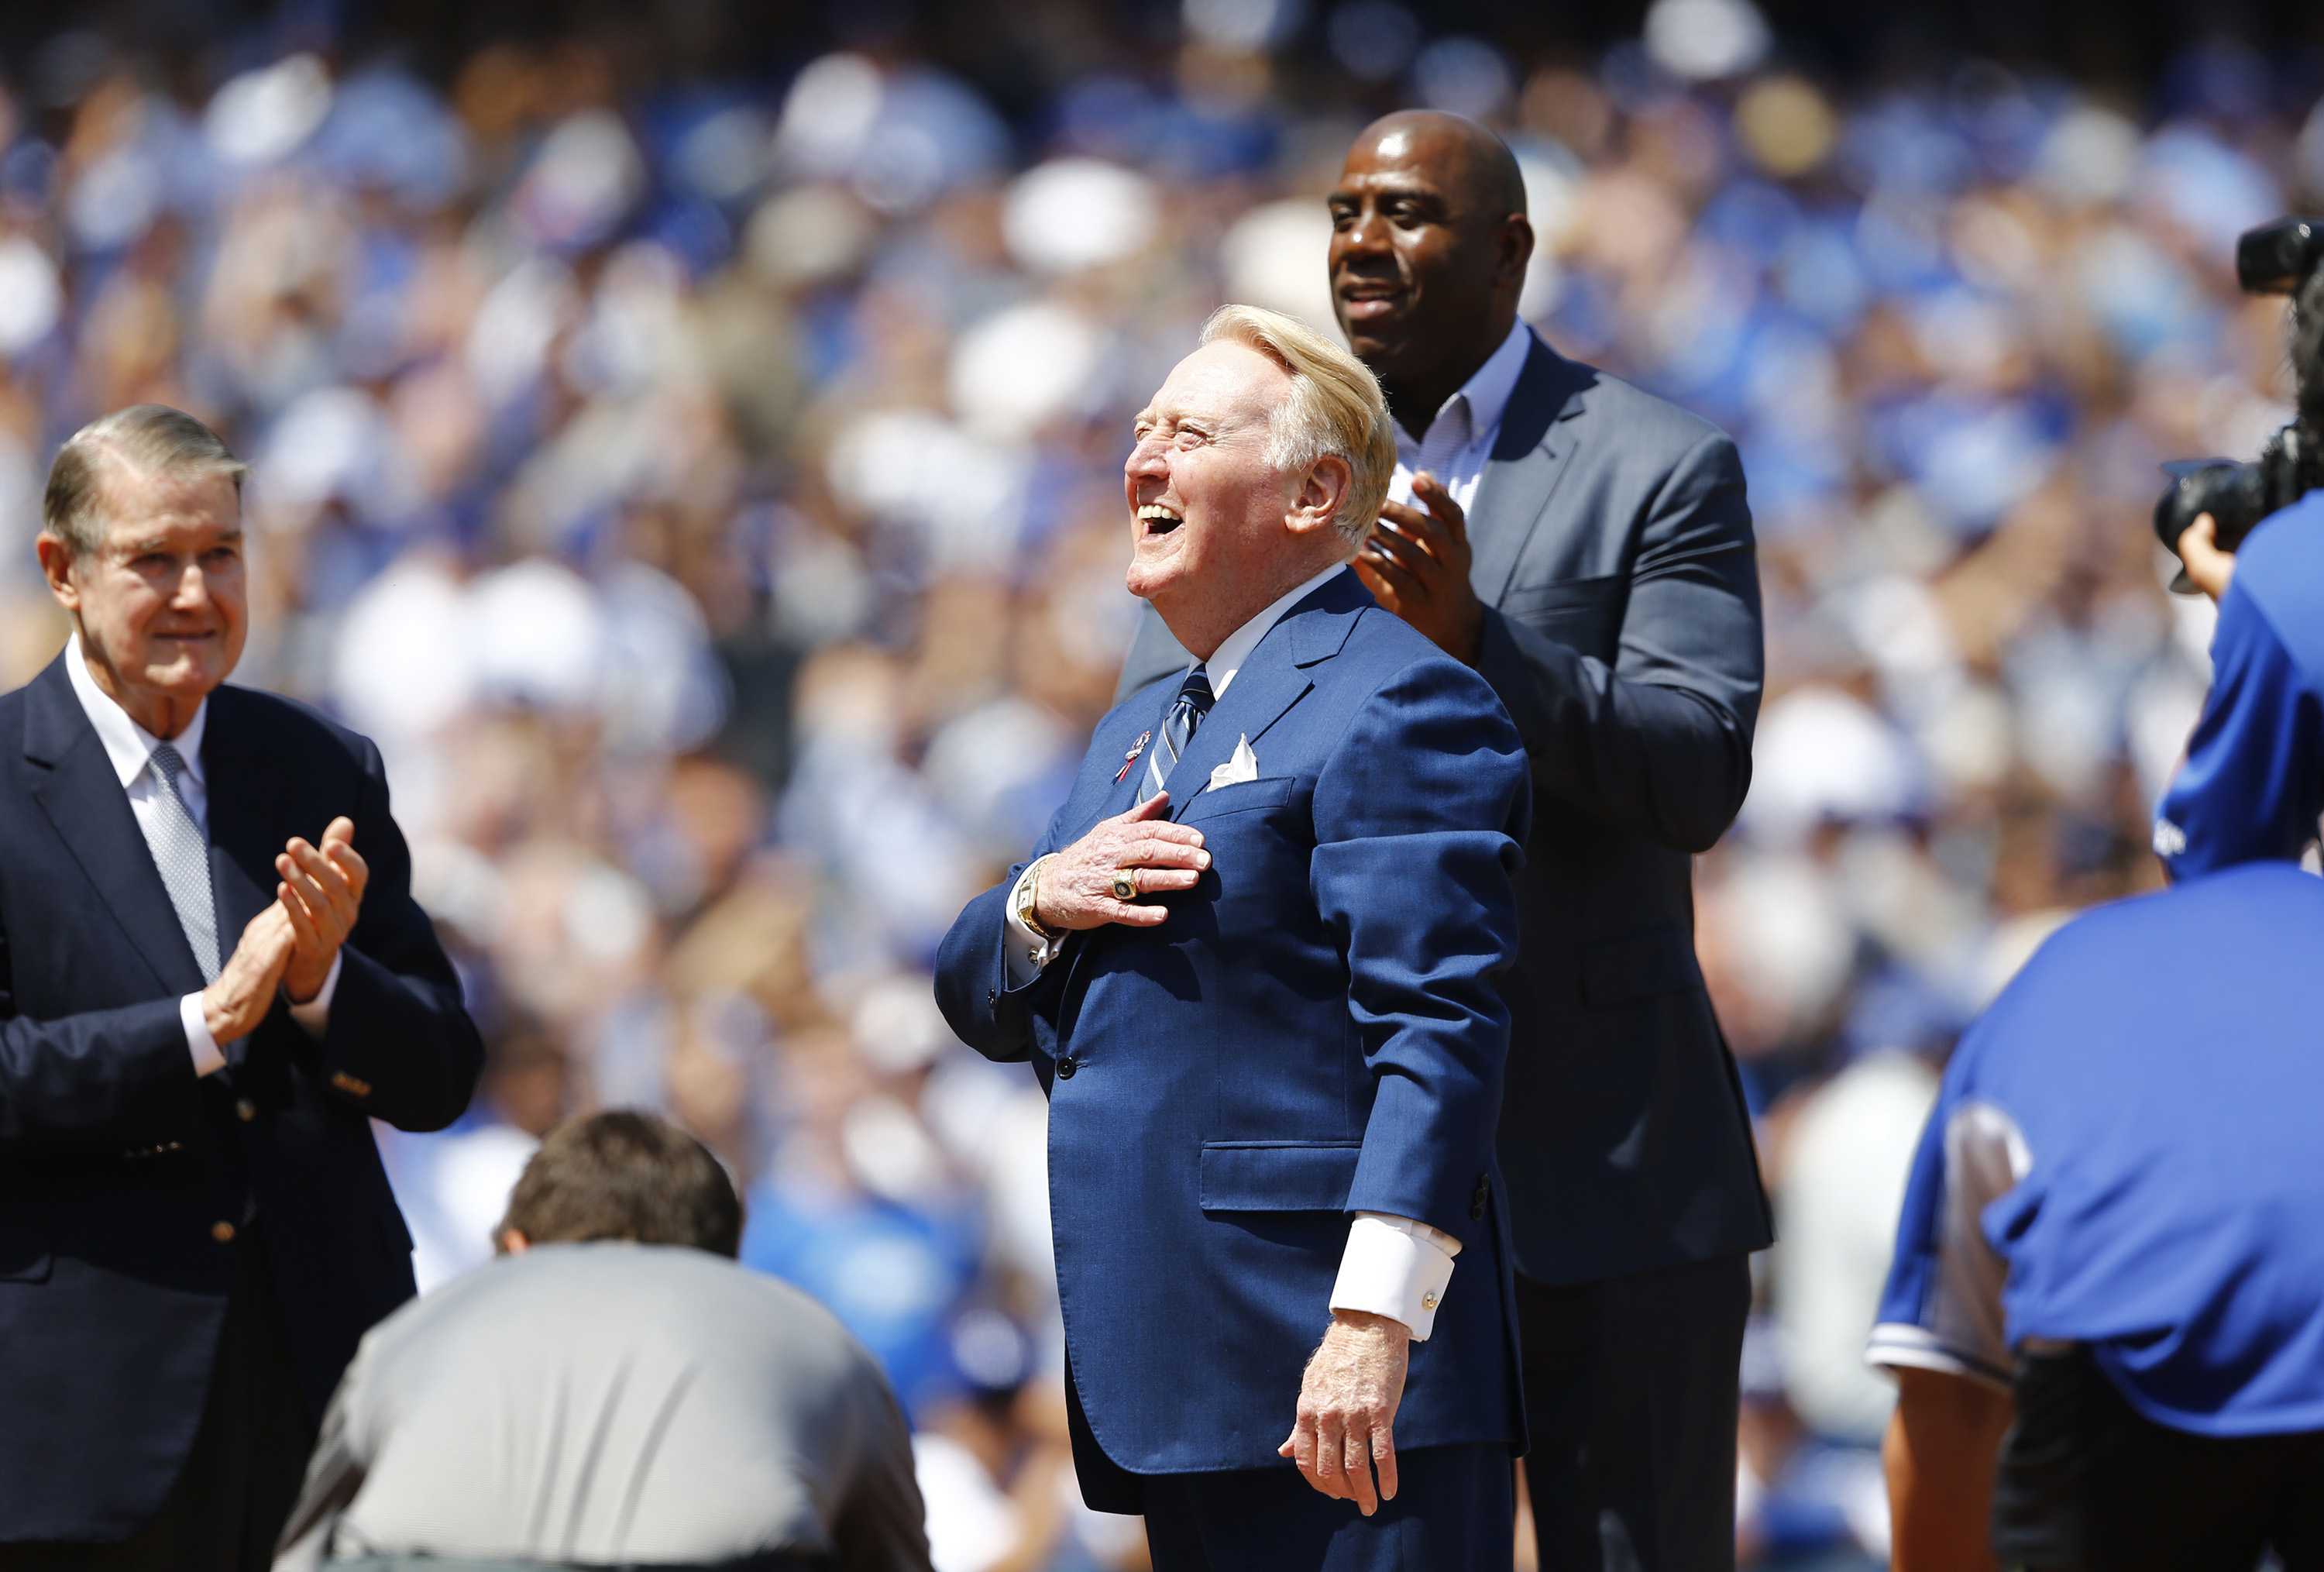 Los Angeles Dodgers announcer Vin Scully is honored at home plate in a pregame ceremony on his last Opening Day, on Tuesday, April 12, 2016, at Dodger Stadium in Los Angeles. Former Dodgers owner Peter OMalley, left, and Magic Johnson, top, are also on hand. (Gina Ferazzi/Los Angeles Times/TNS/MCT)